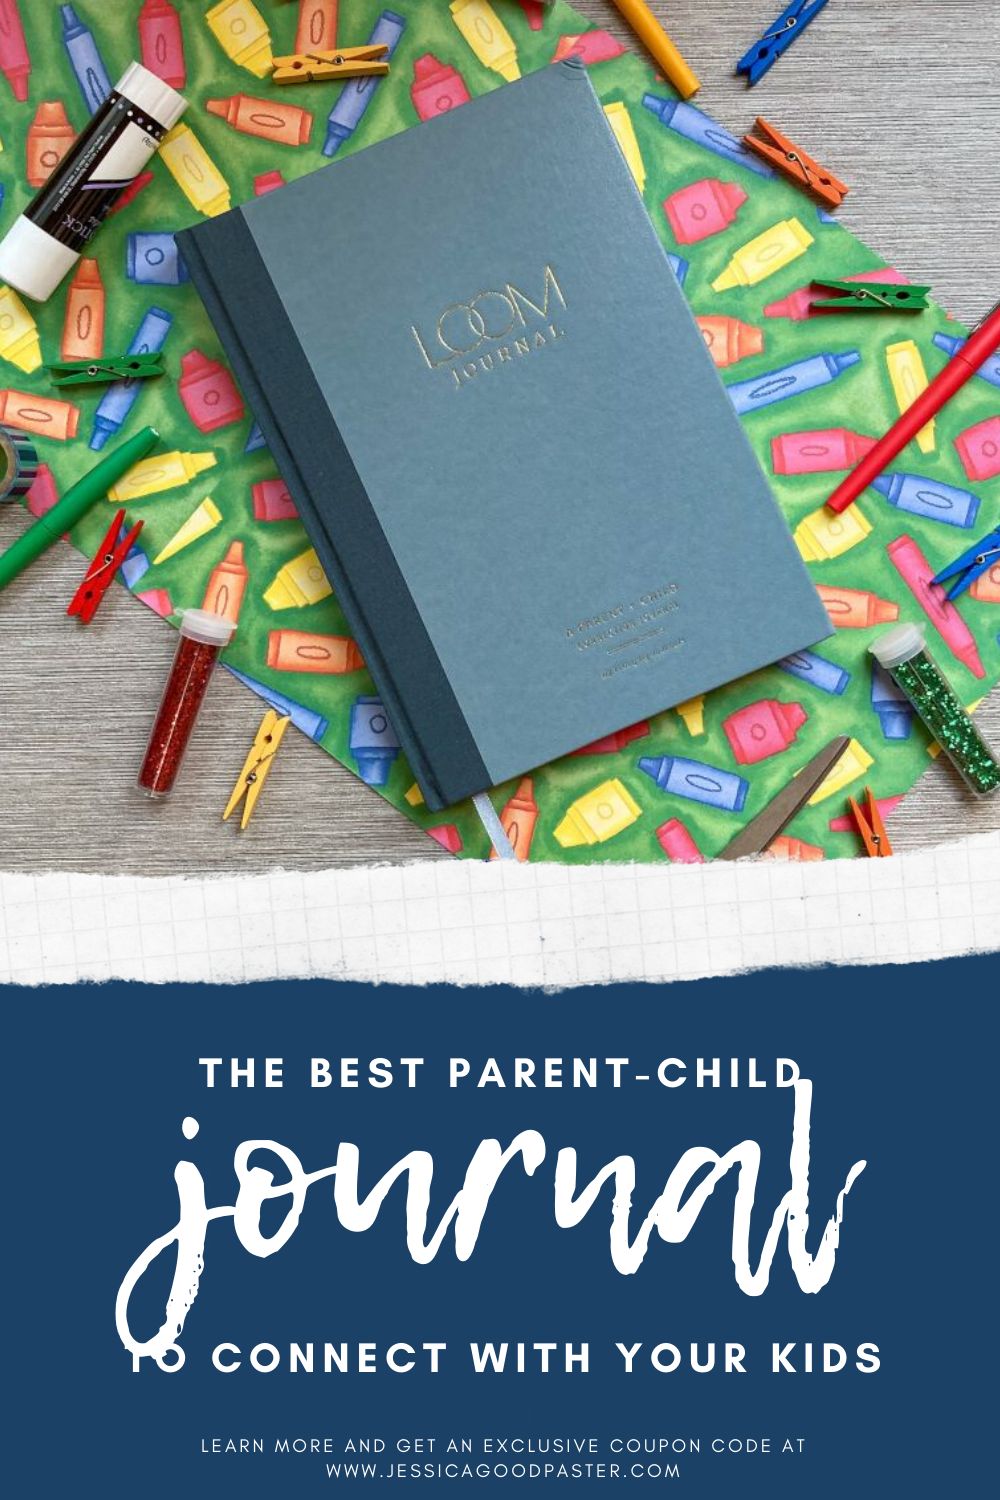 The Best Parent-Child Guided Journal | Journal prompts make documenting, connecting, and healing so much easier. Promptly Journals provide journaling ideas with beautiful childhood, adoption, relationship, autobiography, travel, and missionary journals…and more! Their two-person journals foster inspiration and connection. Check out my review today! #journaling #journals #journalprompts #journalideas #journalinspiration